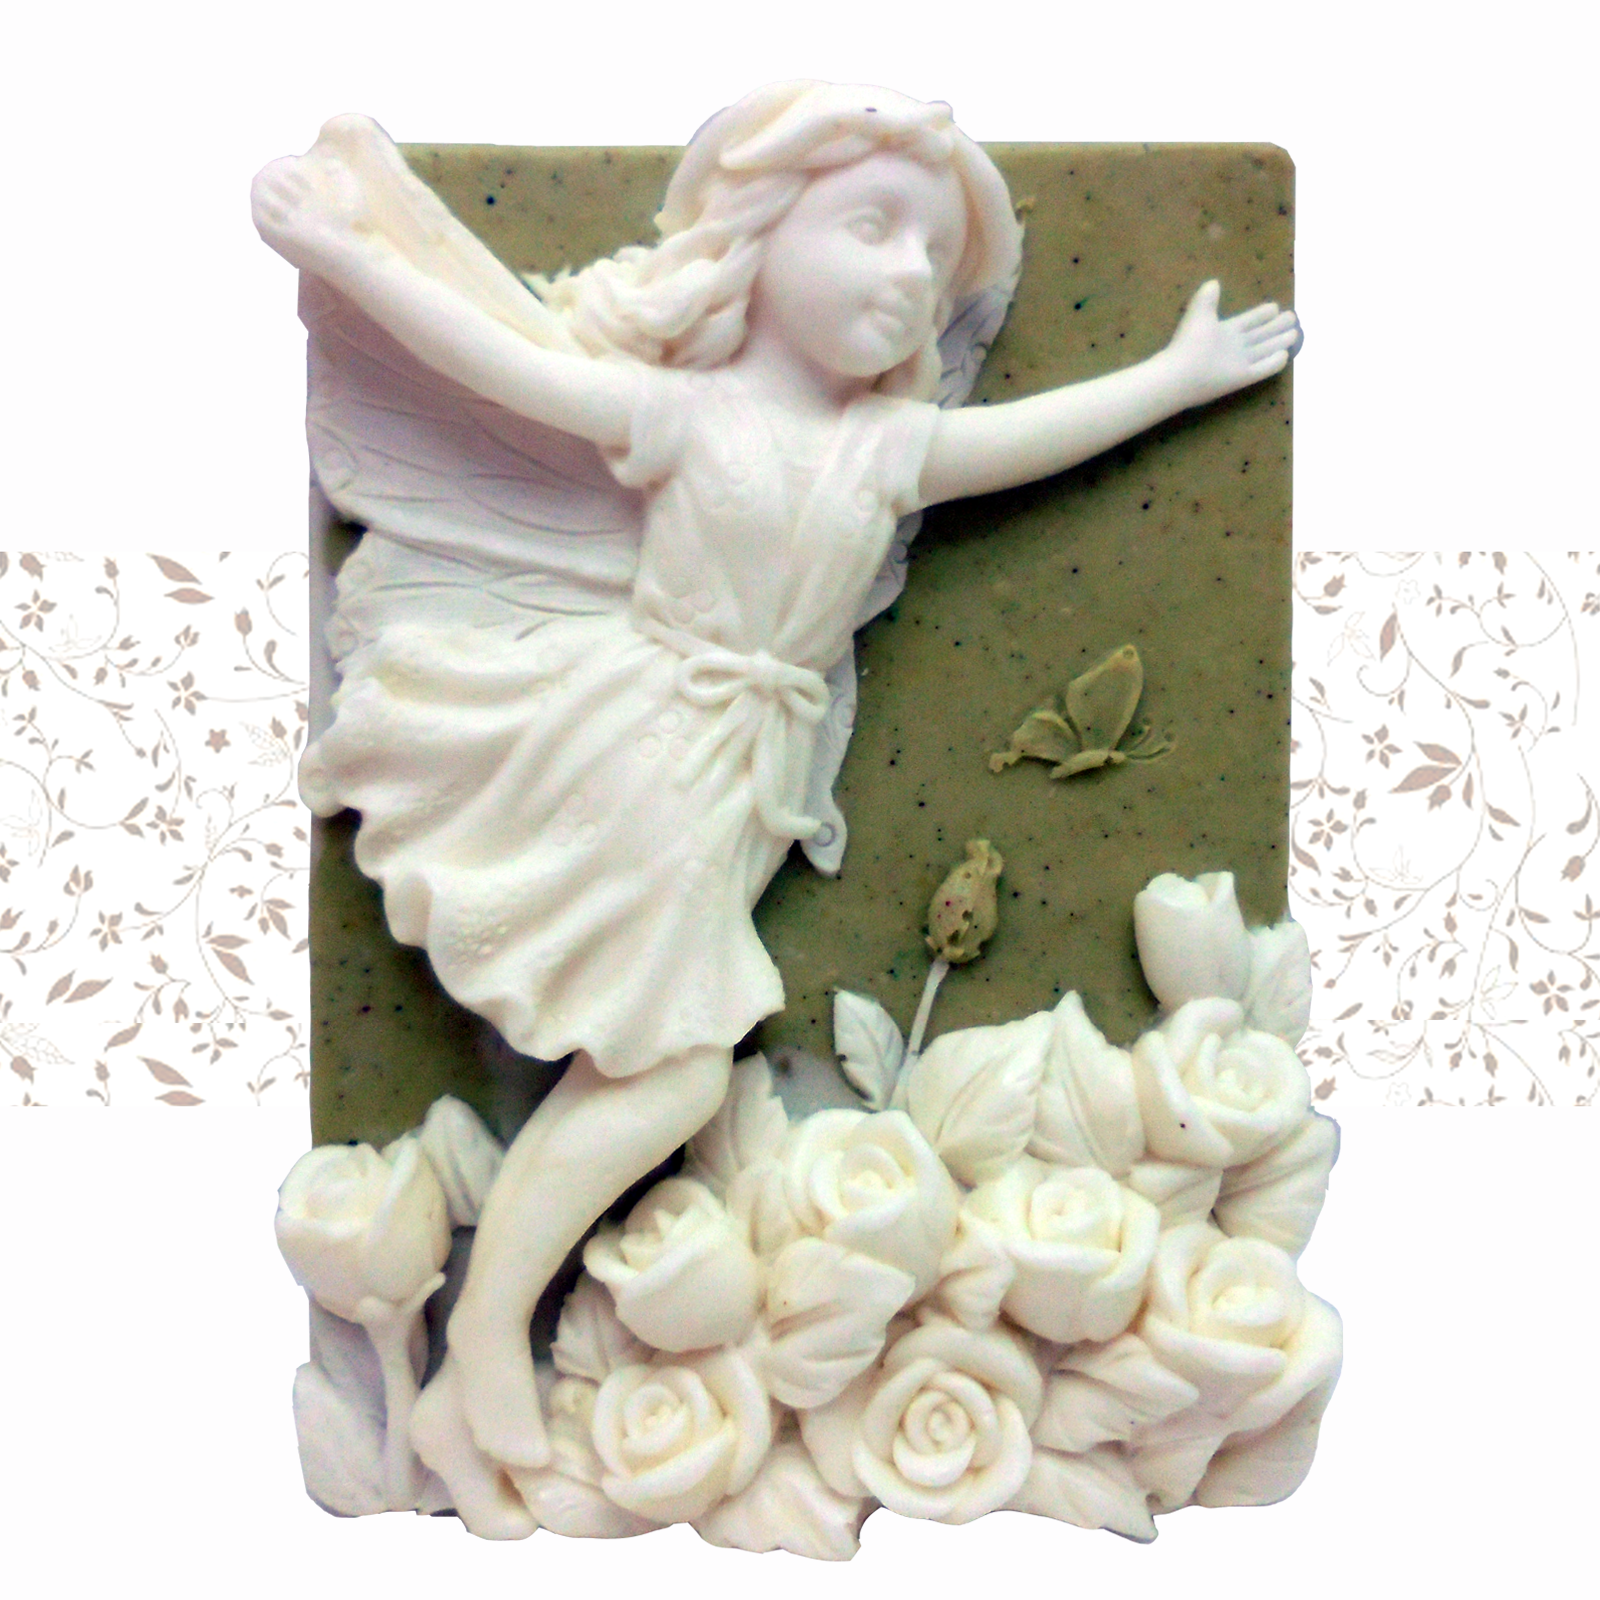 Primary image for 2D silicone Soap/polymer/clay/cold porcelain mold - Aurelia -Fairy of Love